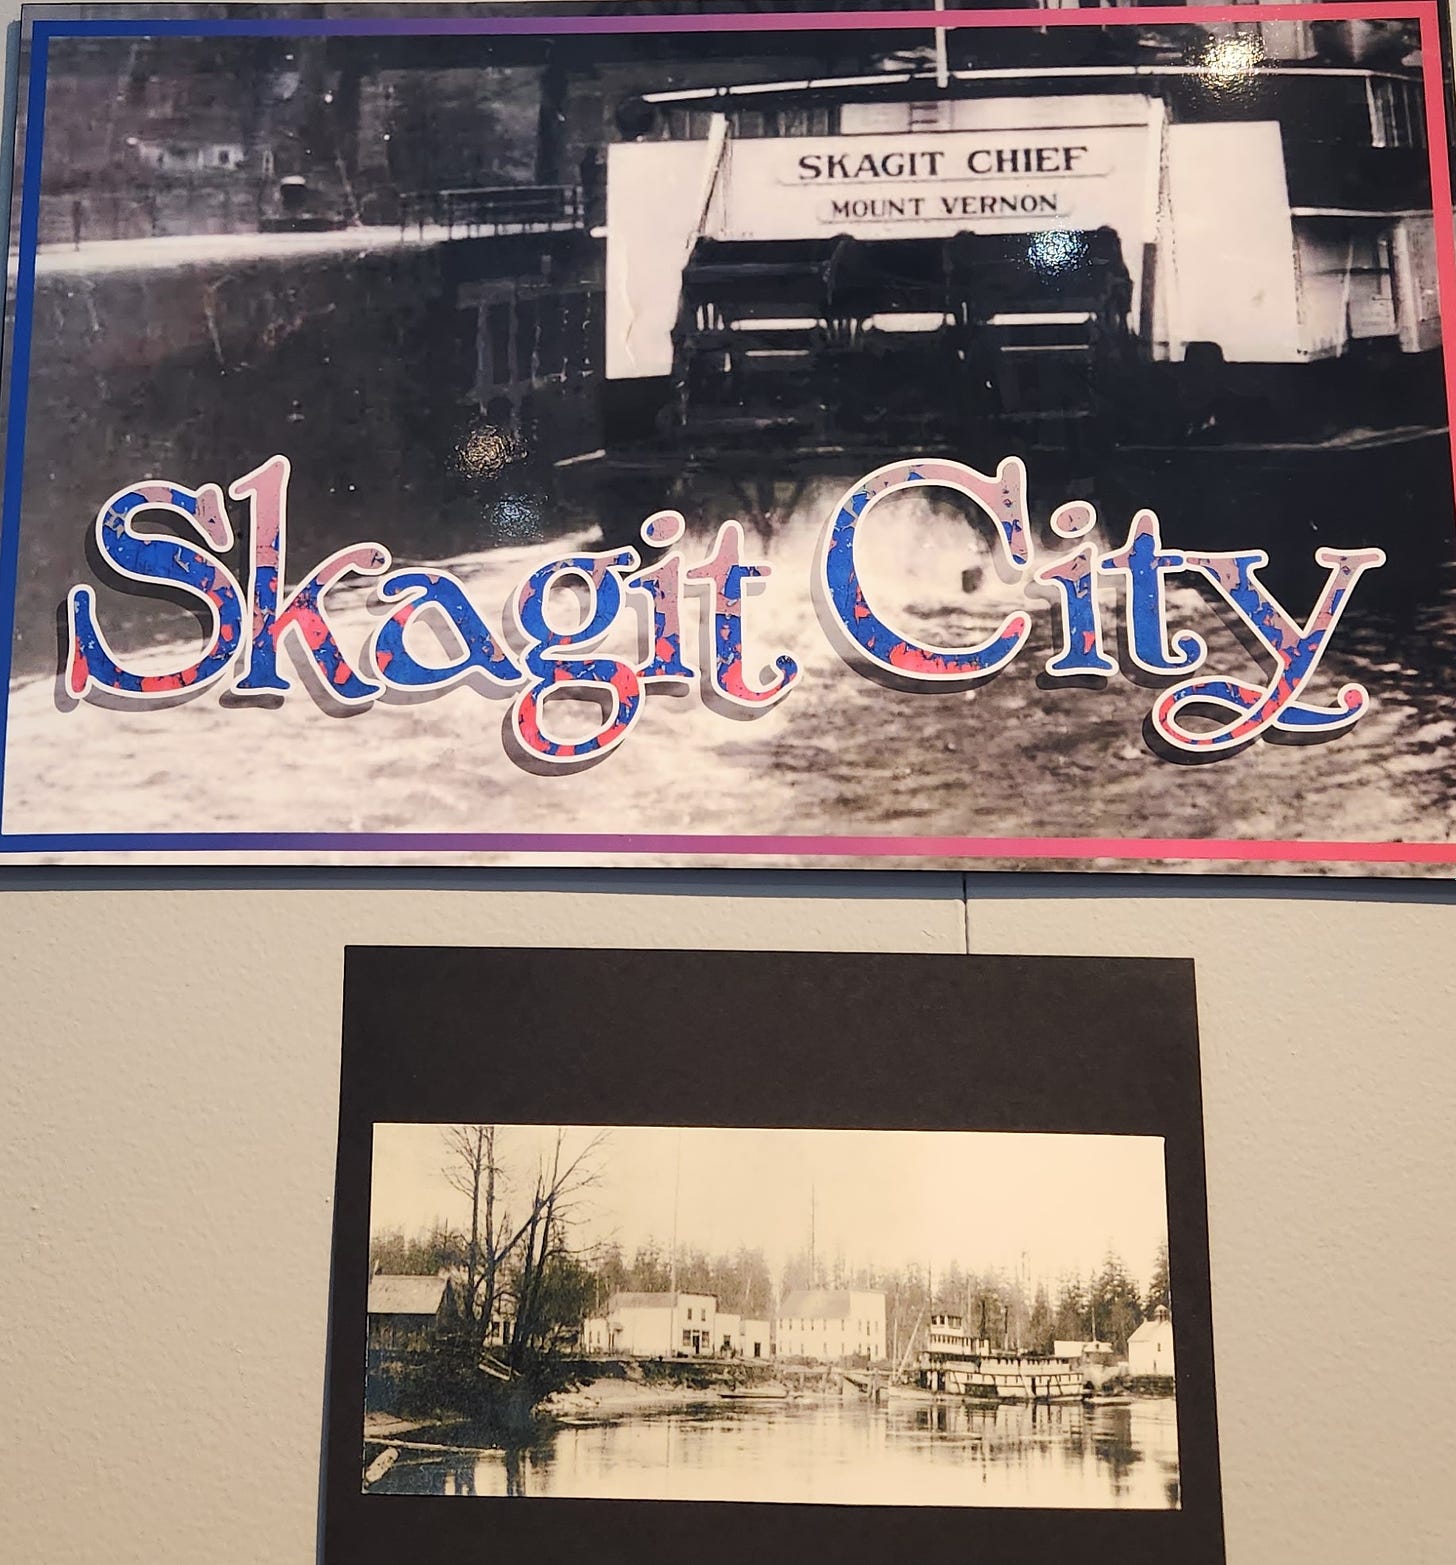 top photo of paddle wheeler named Skagit Chief; bottom photo of boat in the river with large buildings on shore 